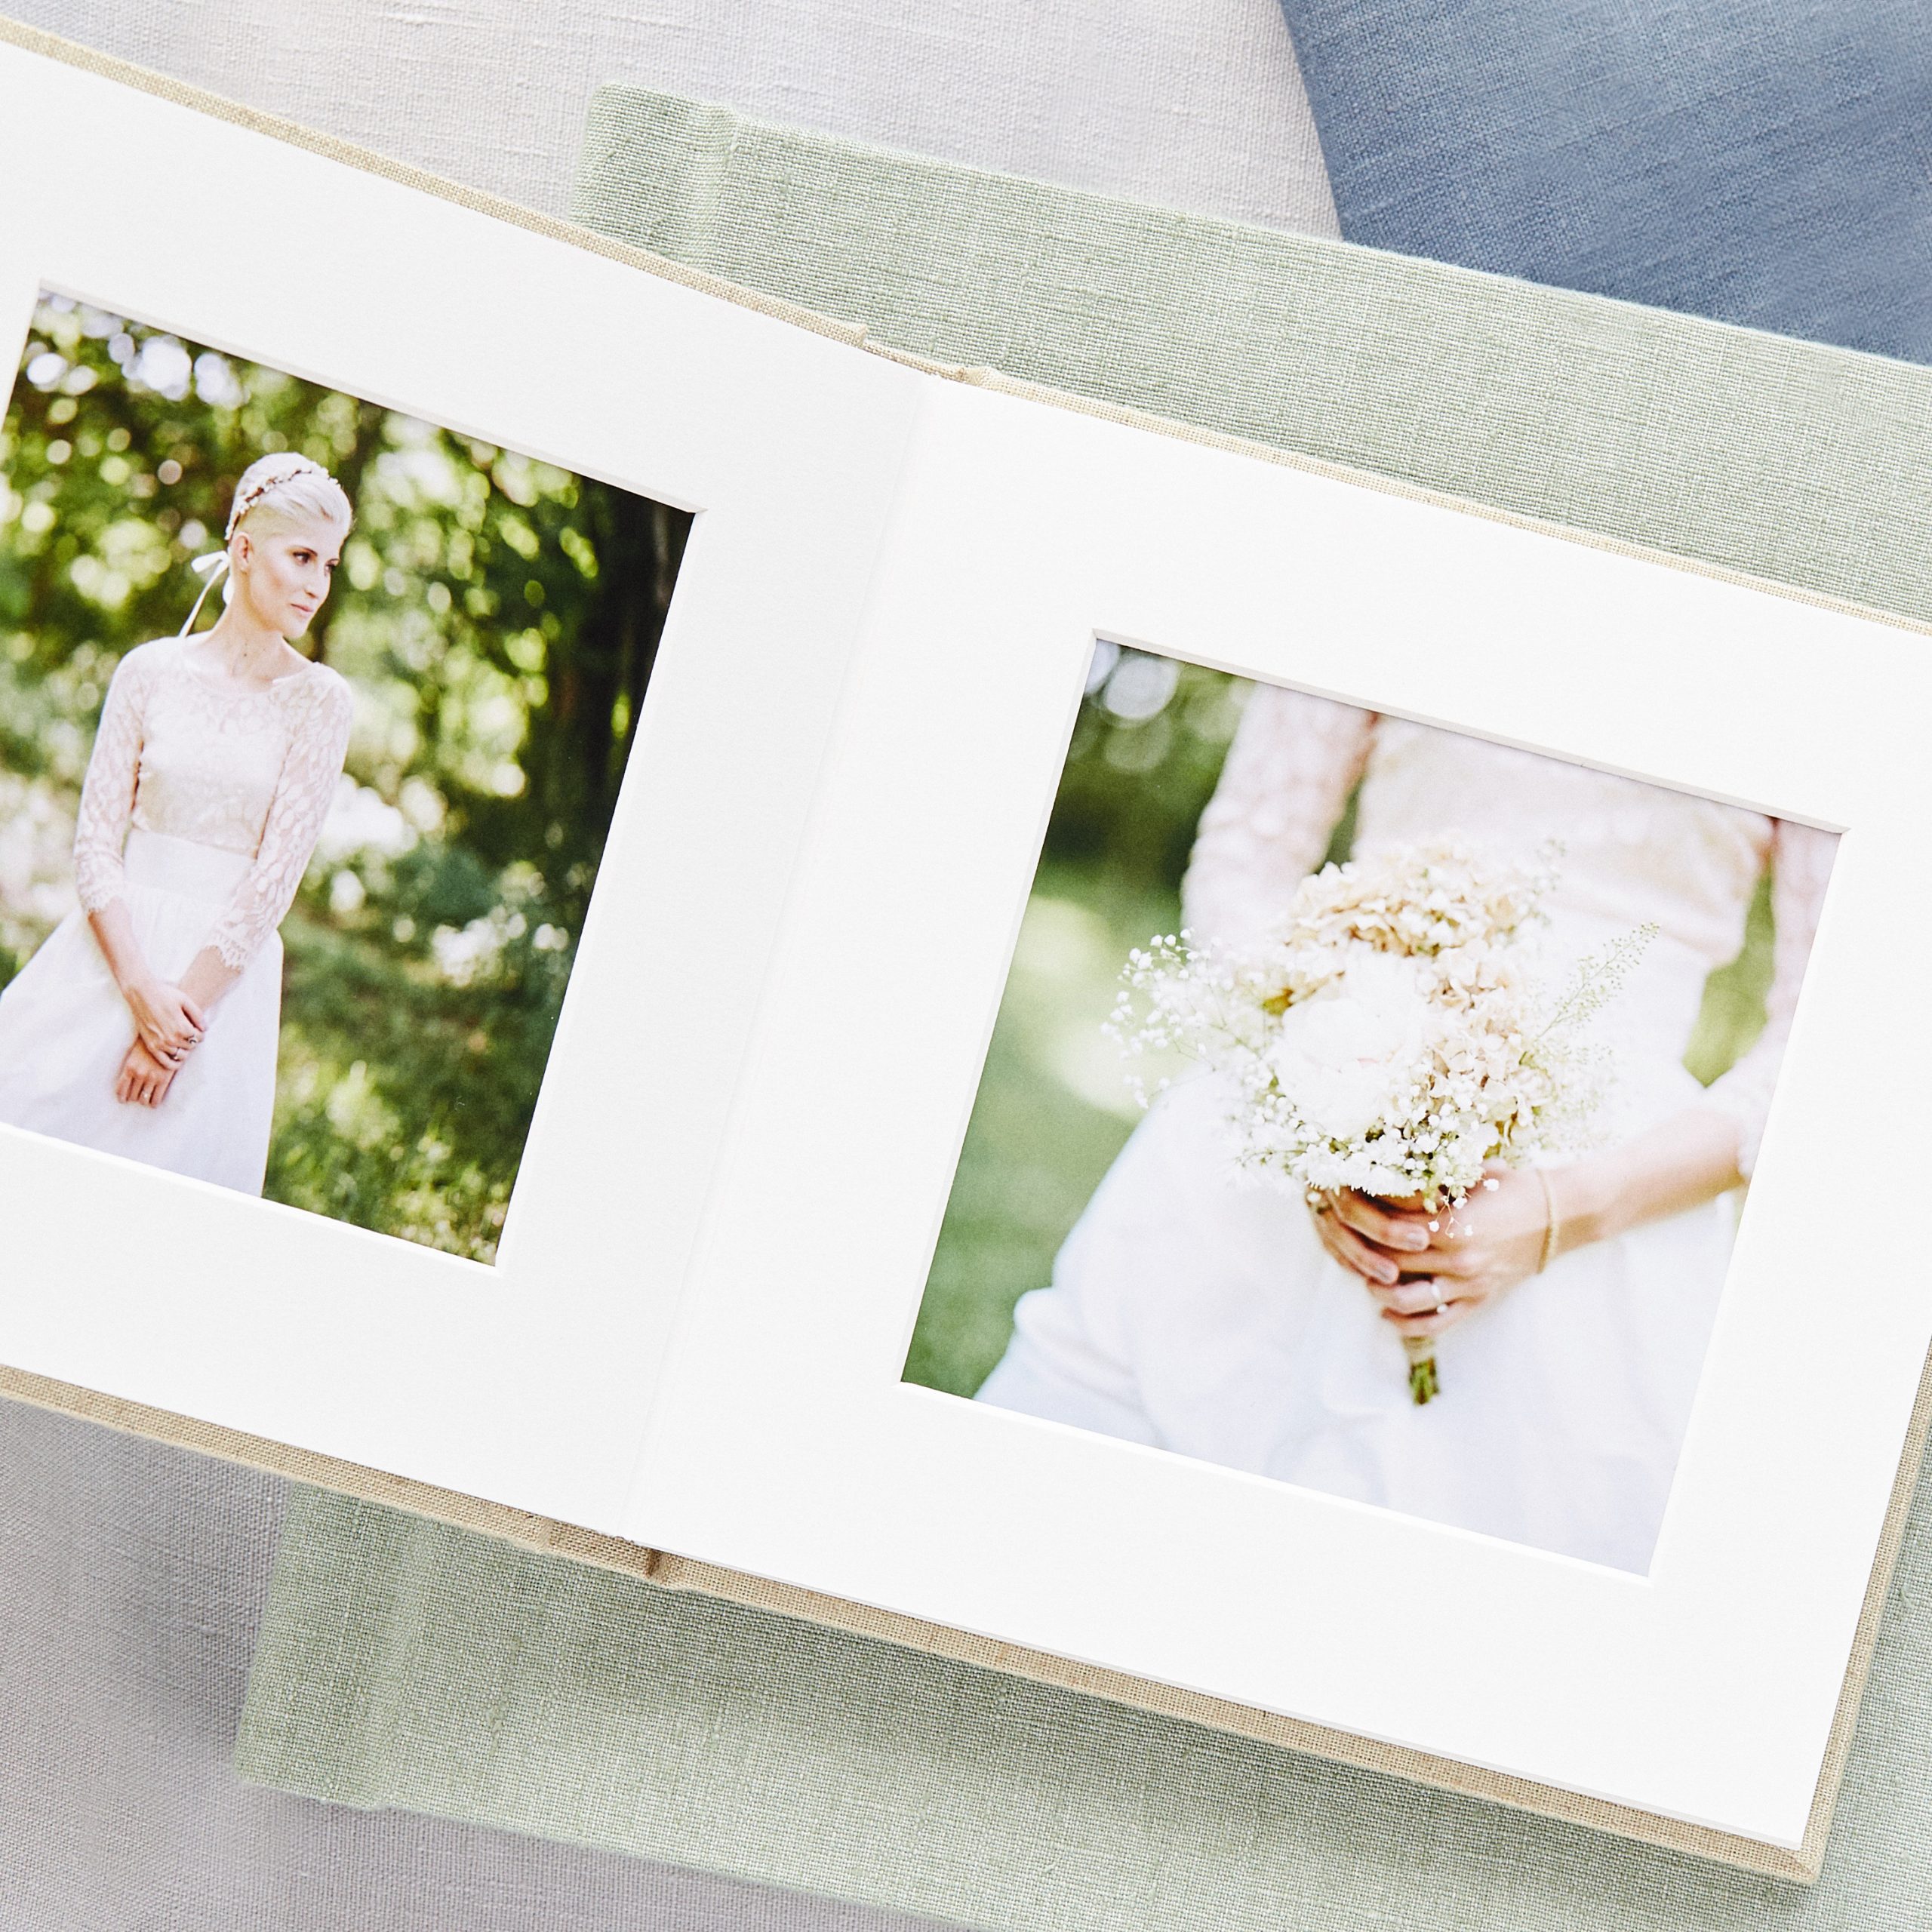 LaShay and Light Wedding Photography Albums green linen